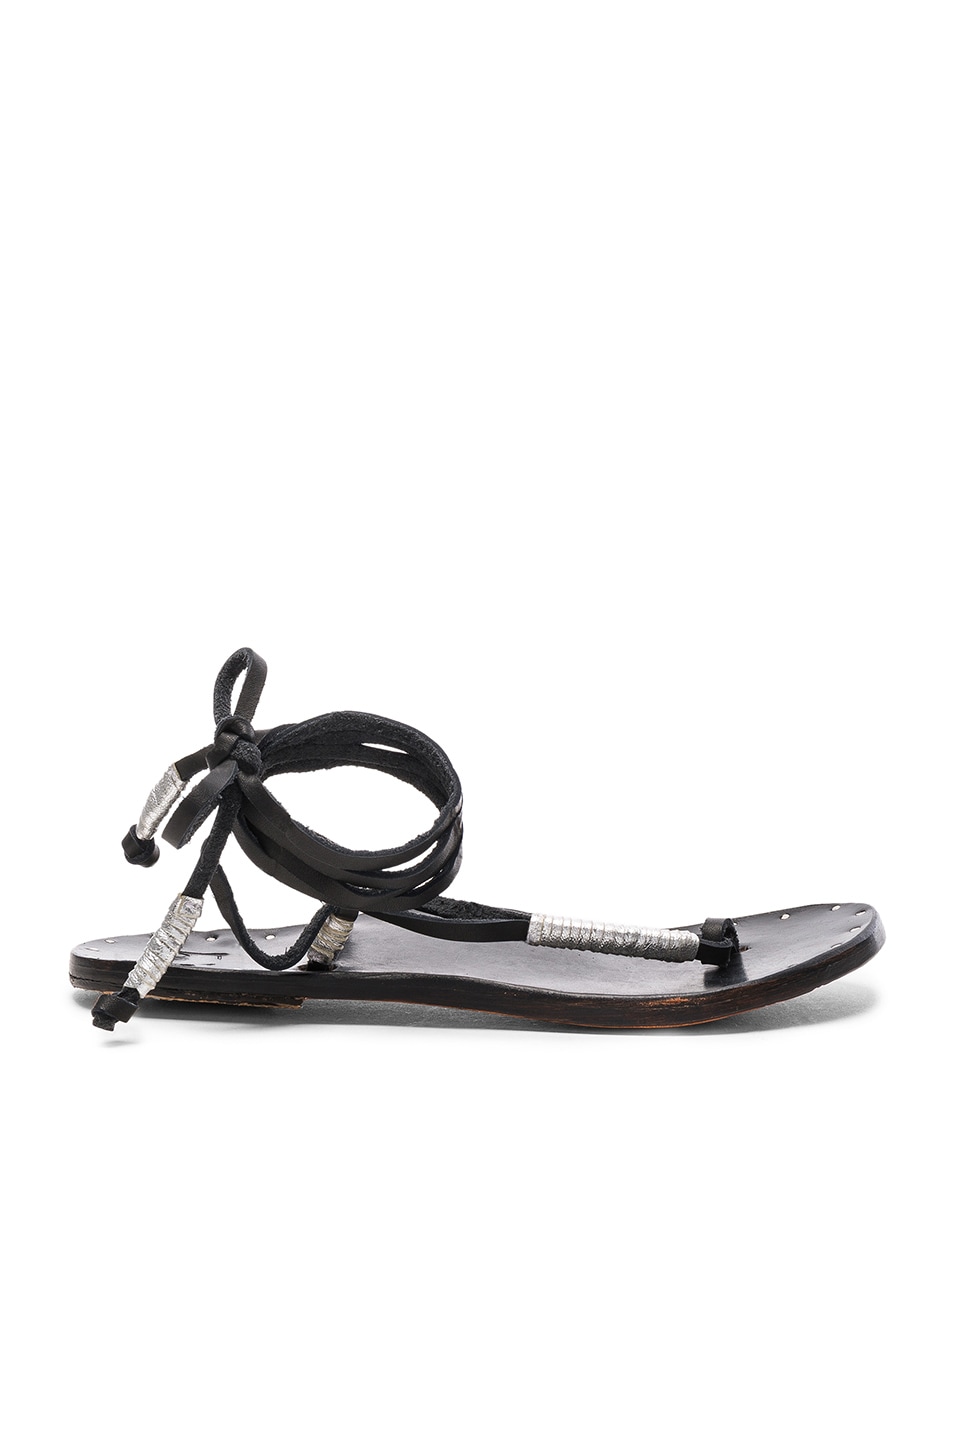 Image 1 of Beek The Crane Sandals in Black & Silver